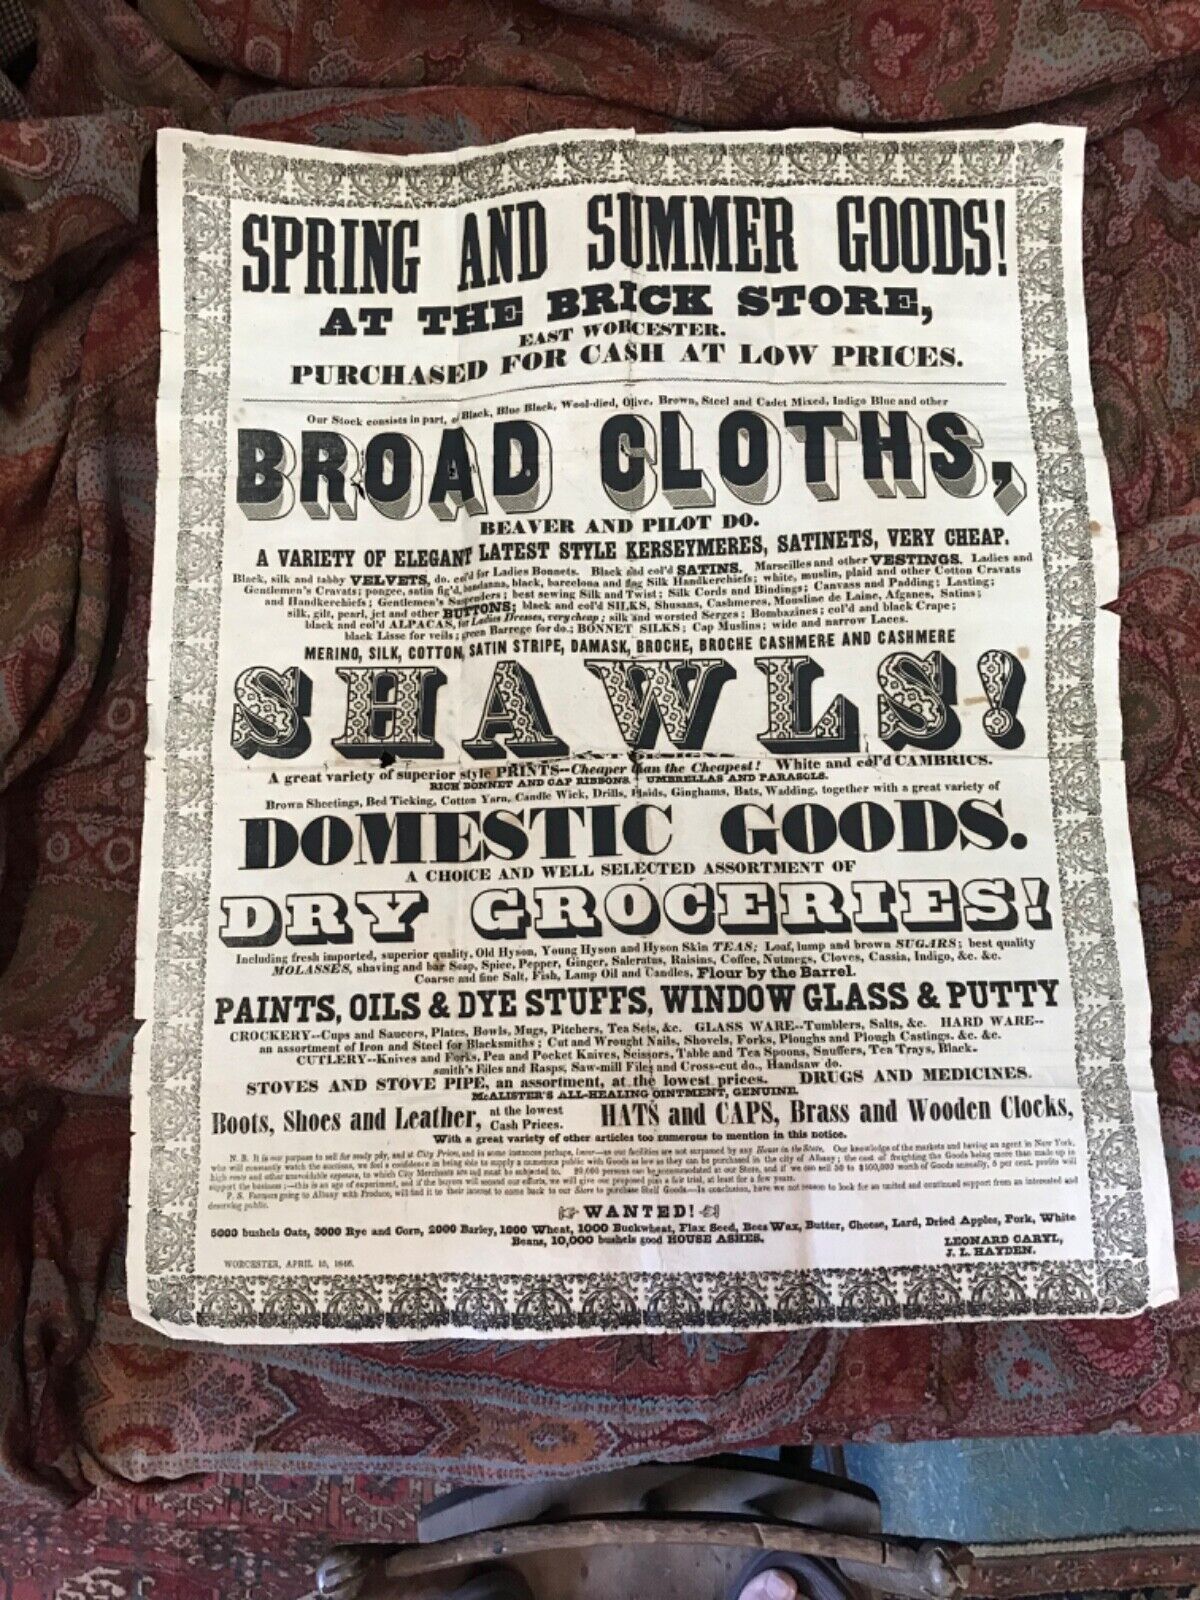 LARGE 23” x 19” 1846 GENERAL COUNTRY STORE BROADSIDE ADVERTISING WORCESTER NY